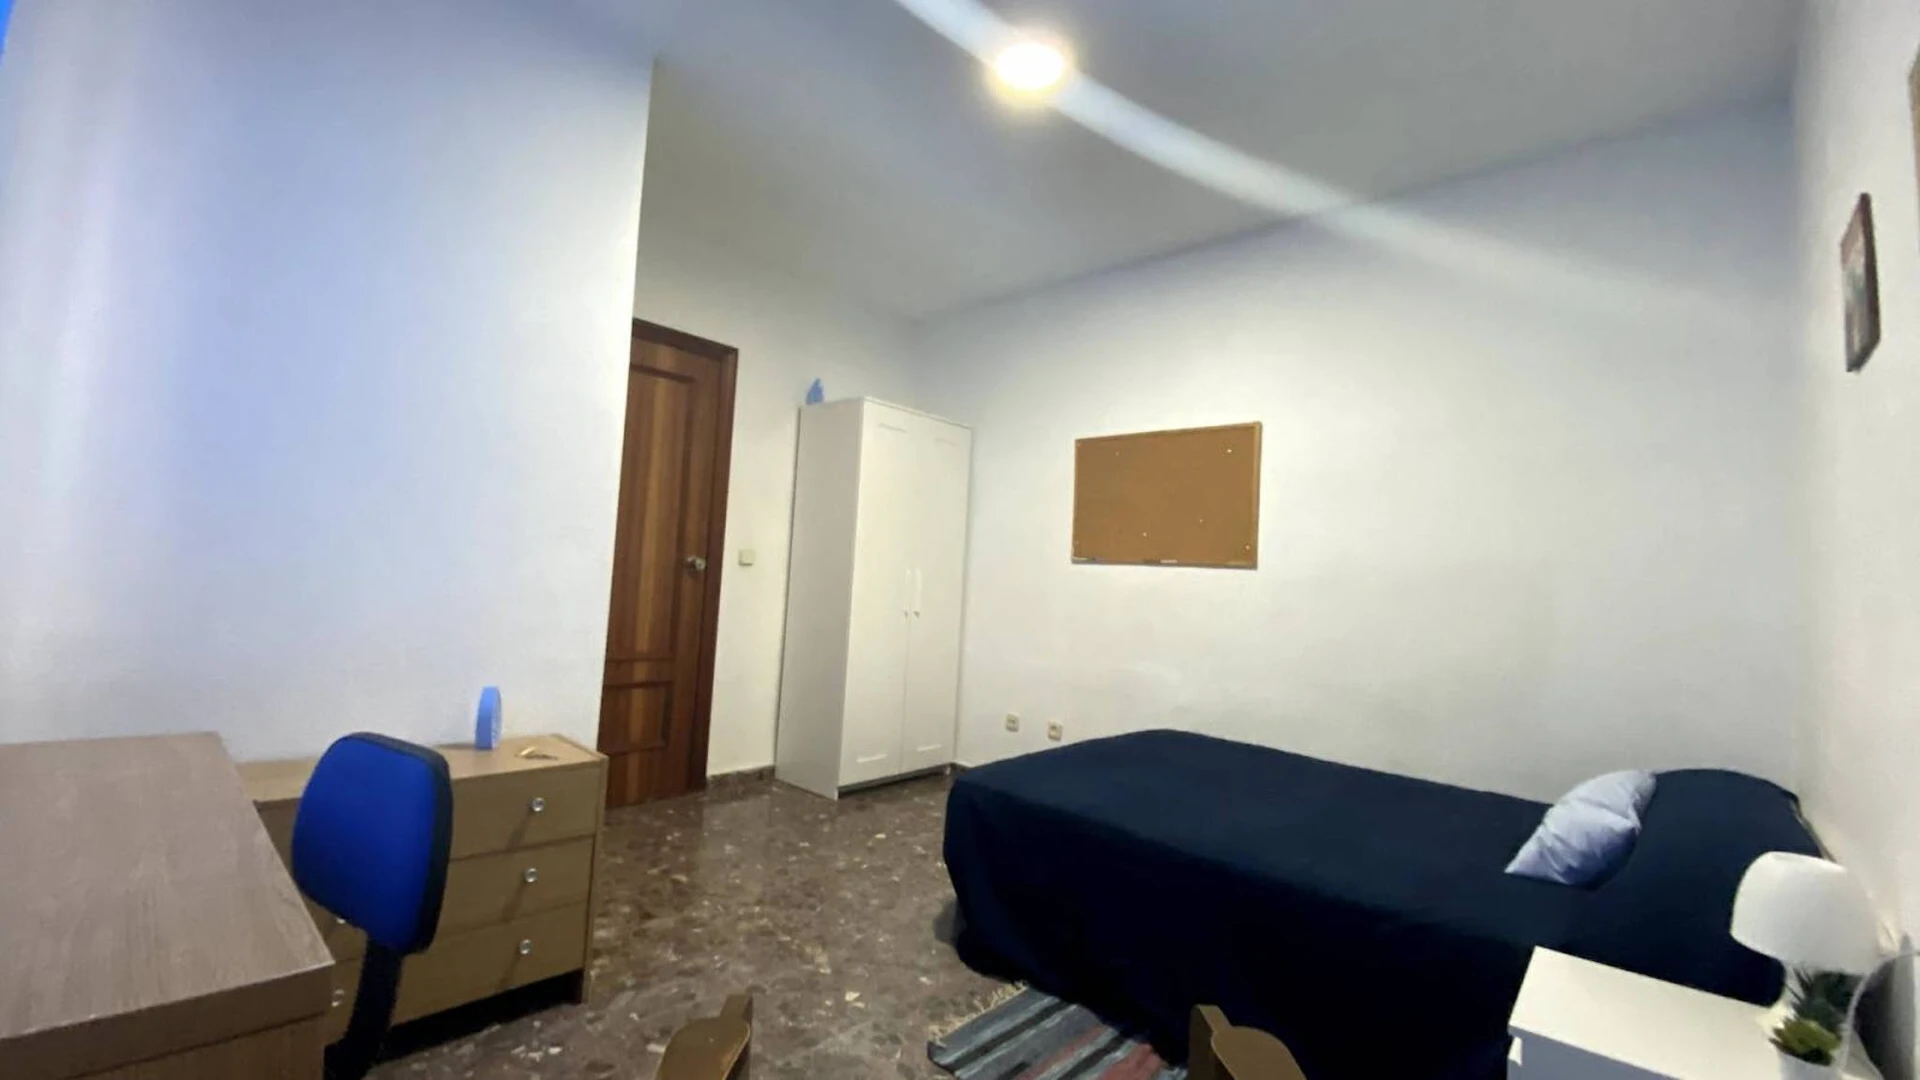 Renting rooms by the month in Cartagena